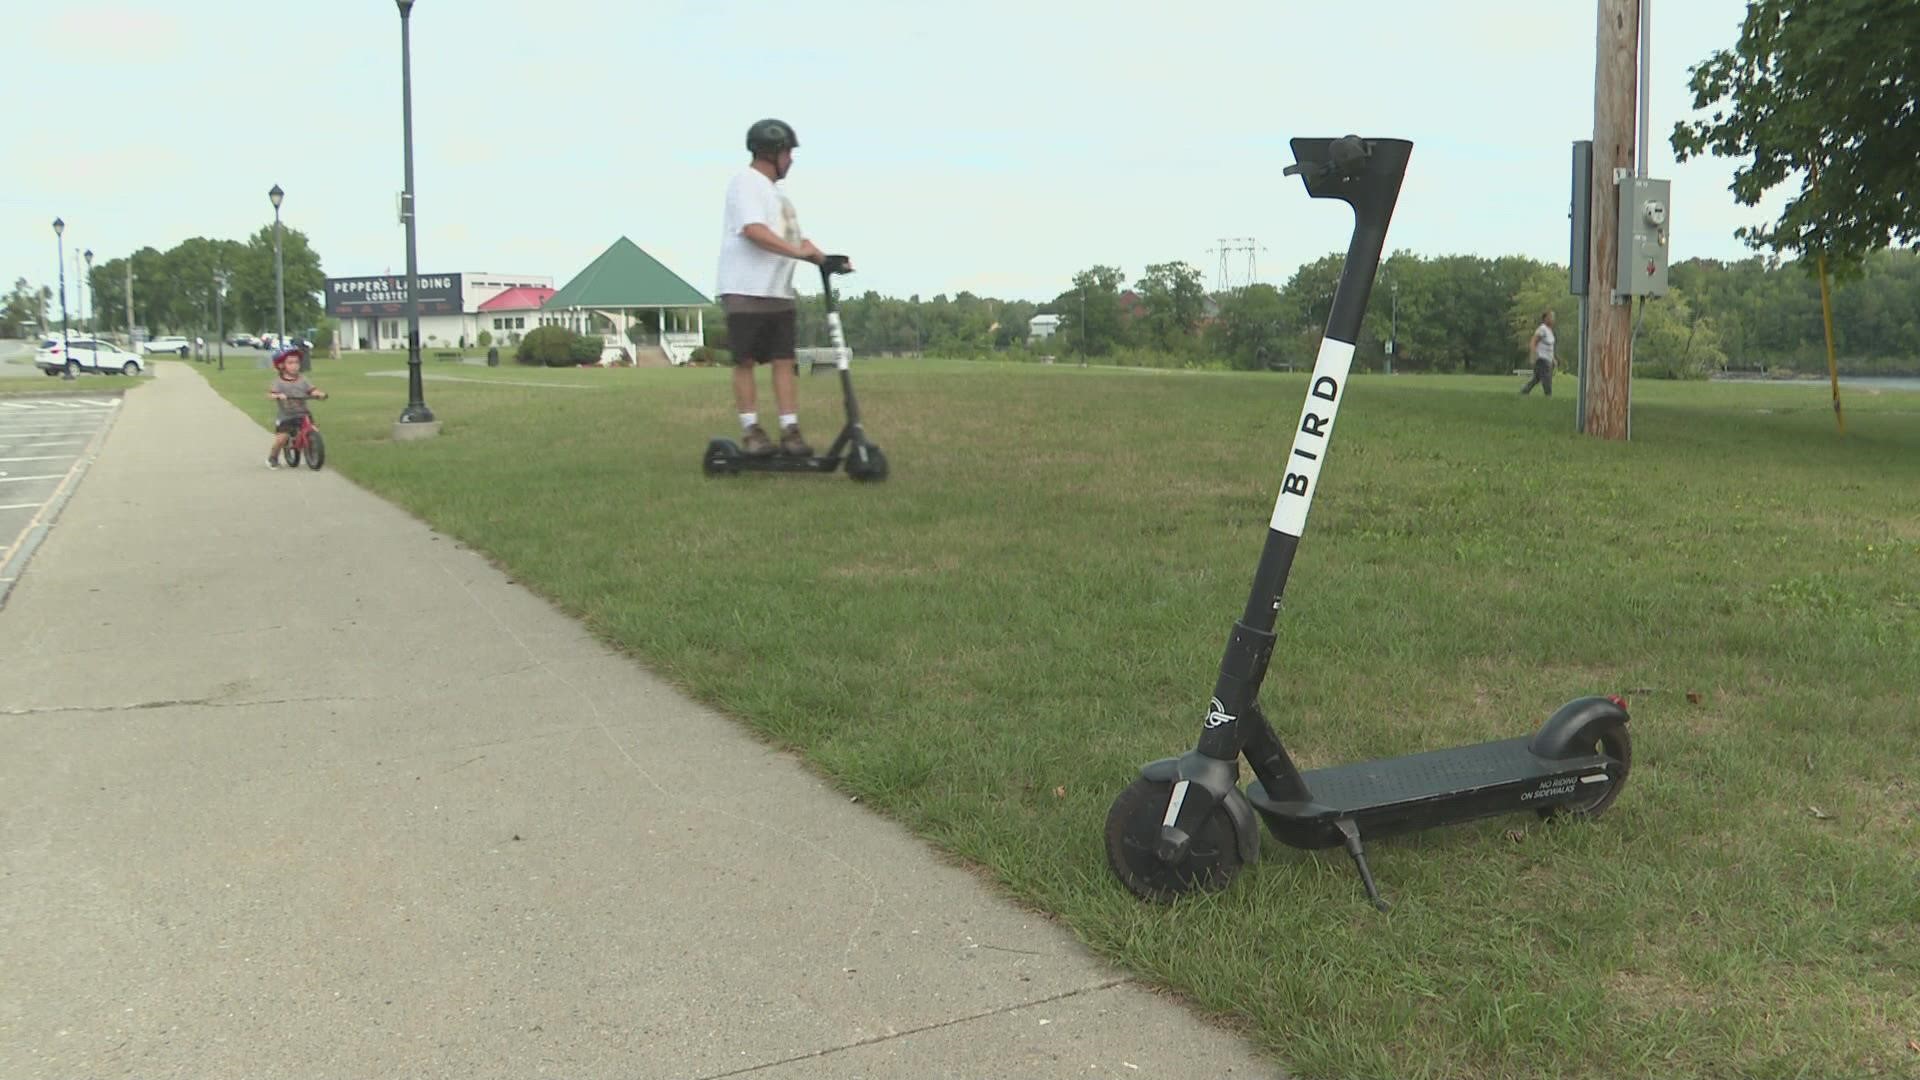 Old Town has partnered with Bird, bringing over three dozen of the eco-friendly scooters to the city.